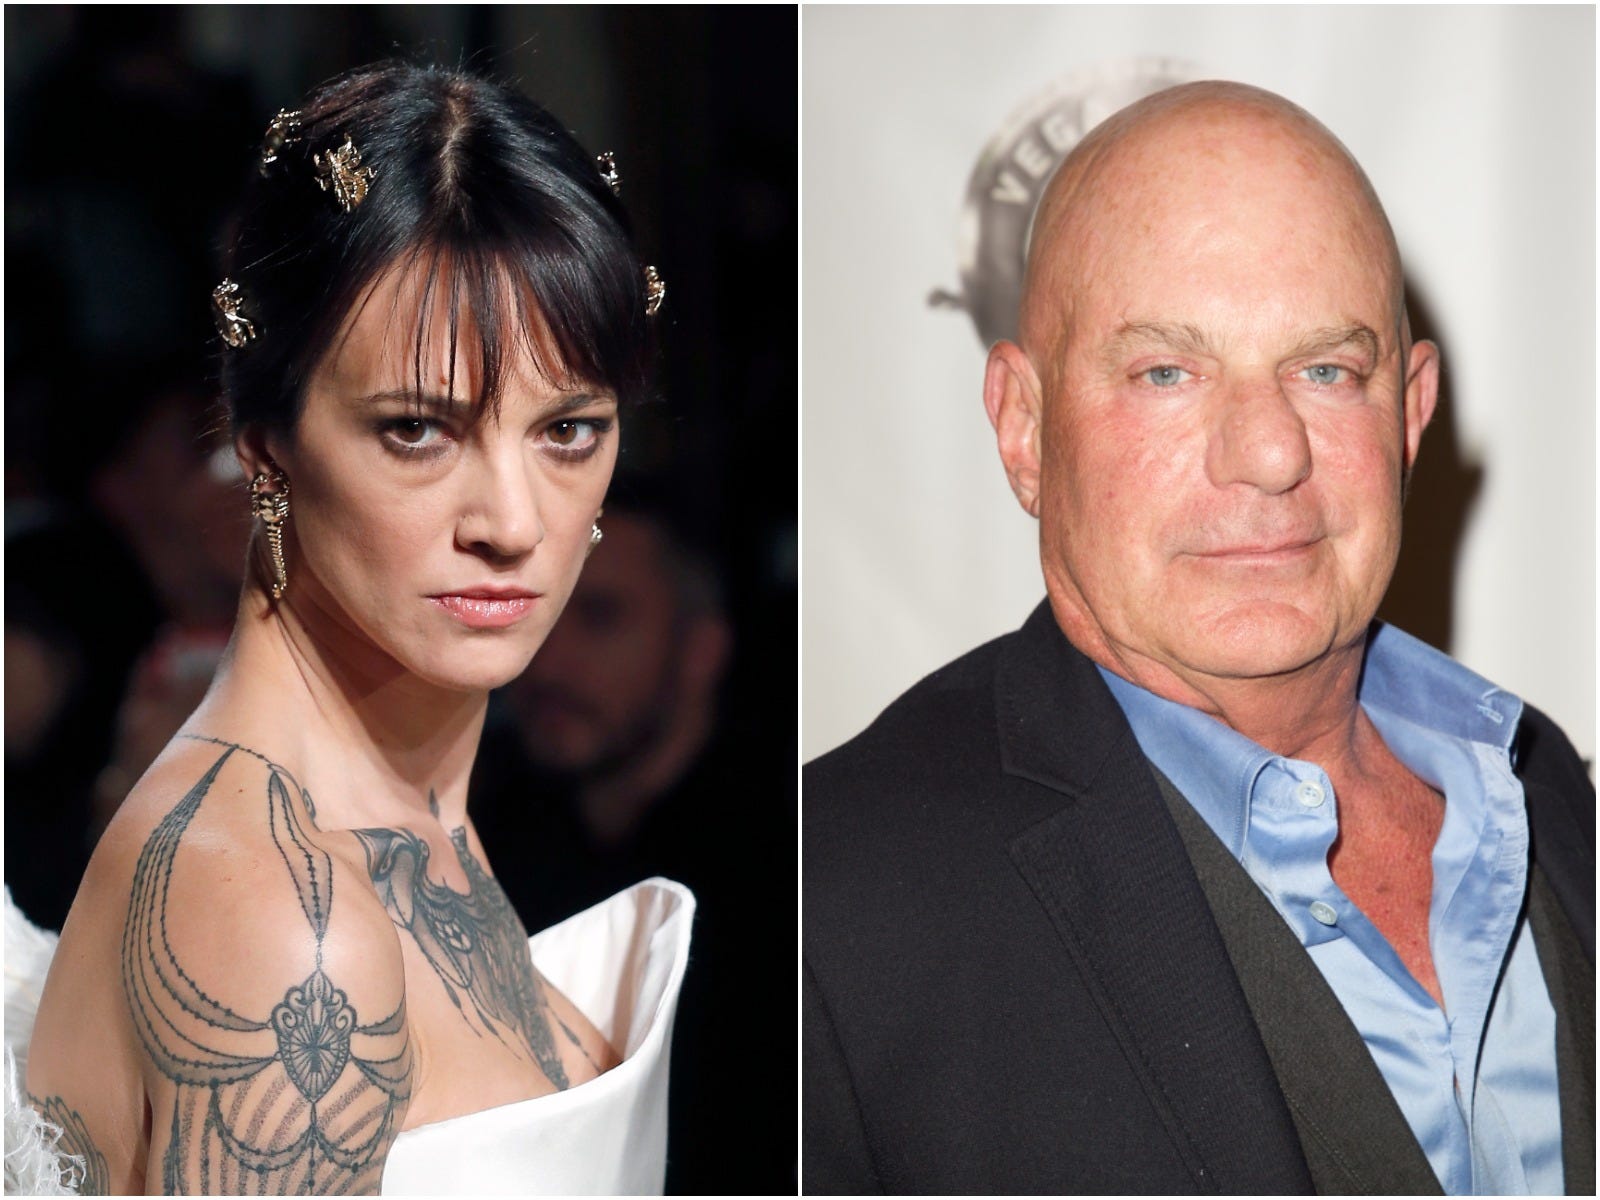 Asia argento accuses the fast and the furious director rob cohen of drugging and sexual assaulting her